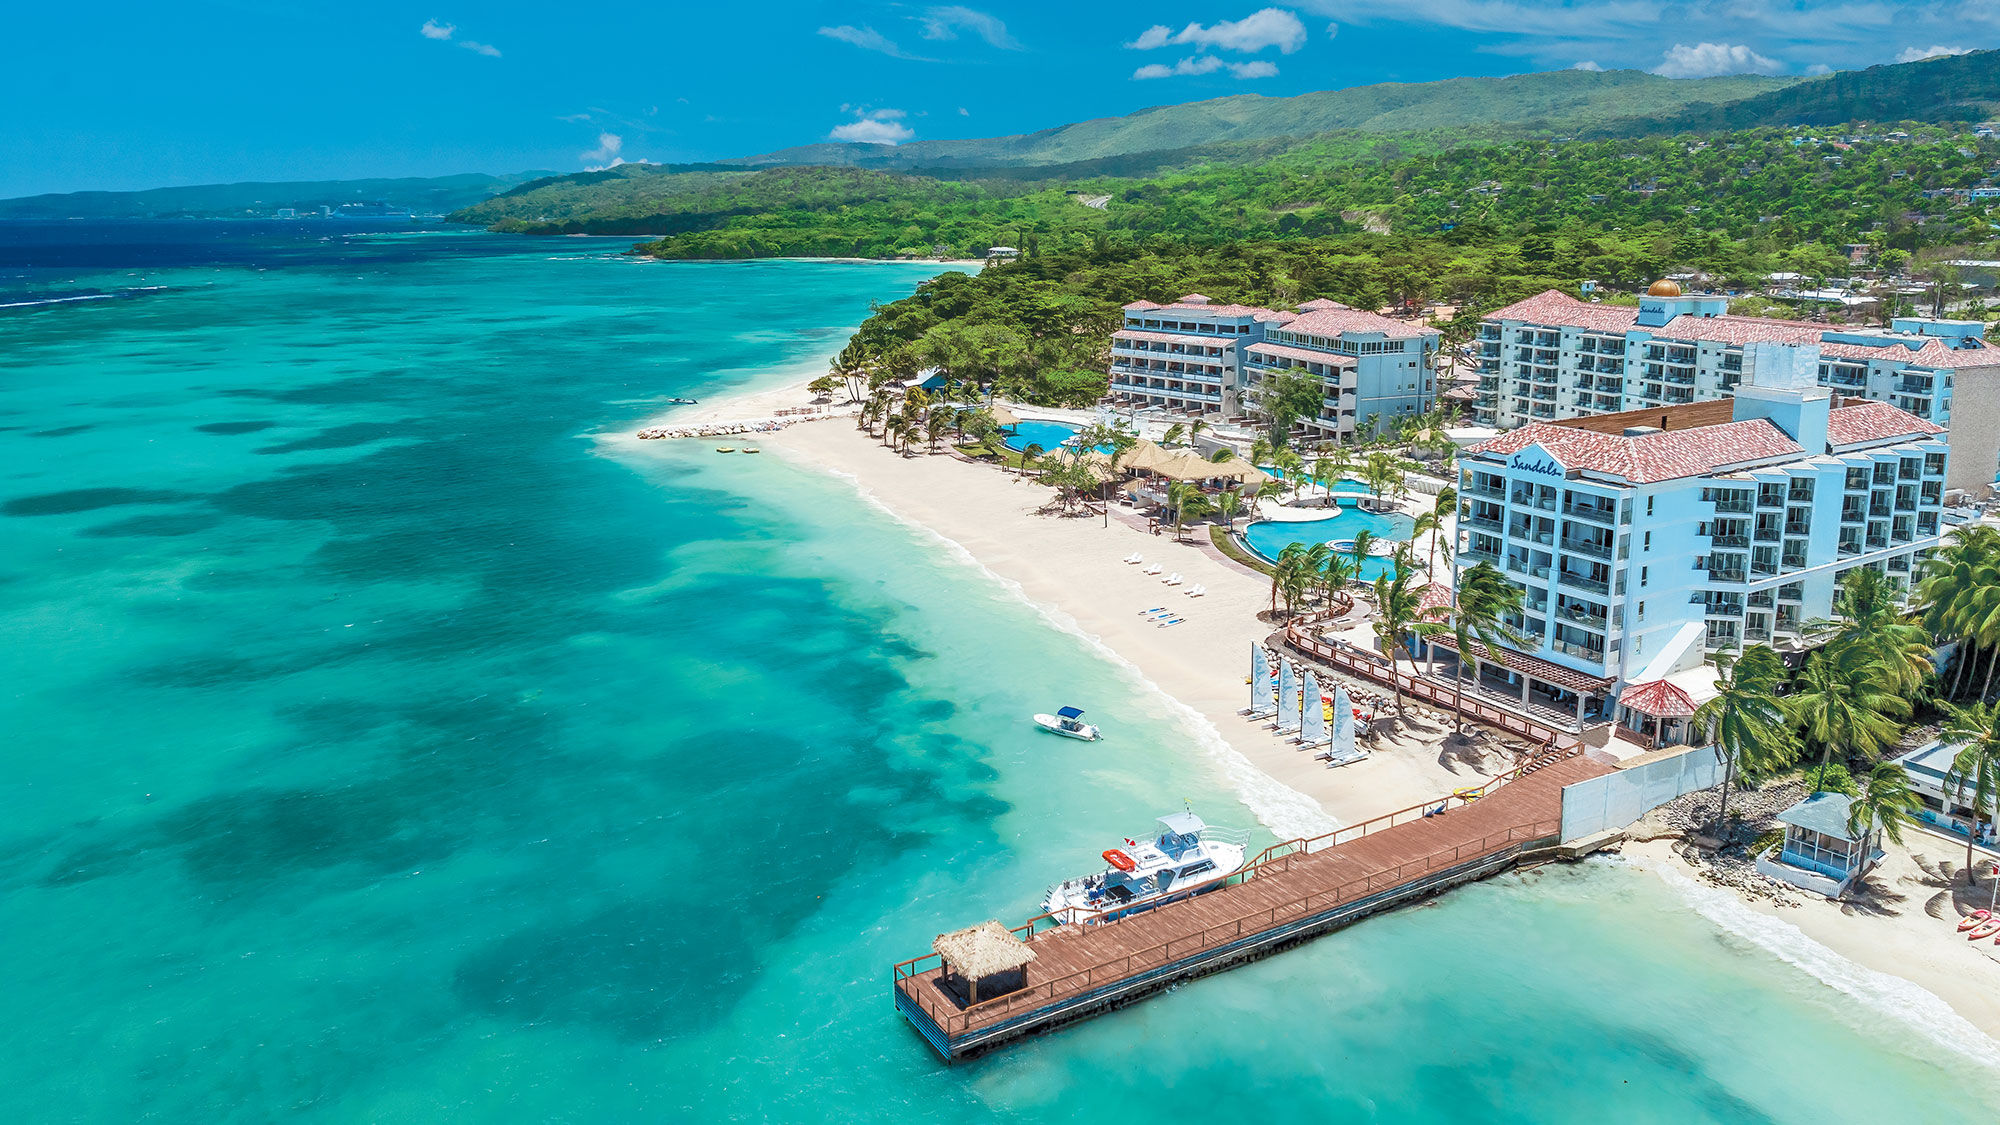 Feature: Sandals Grenada All Inclusive - Endless Family Travels